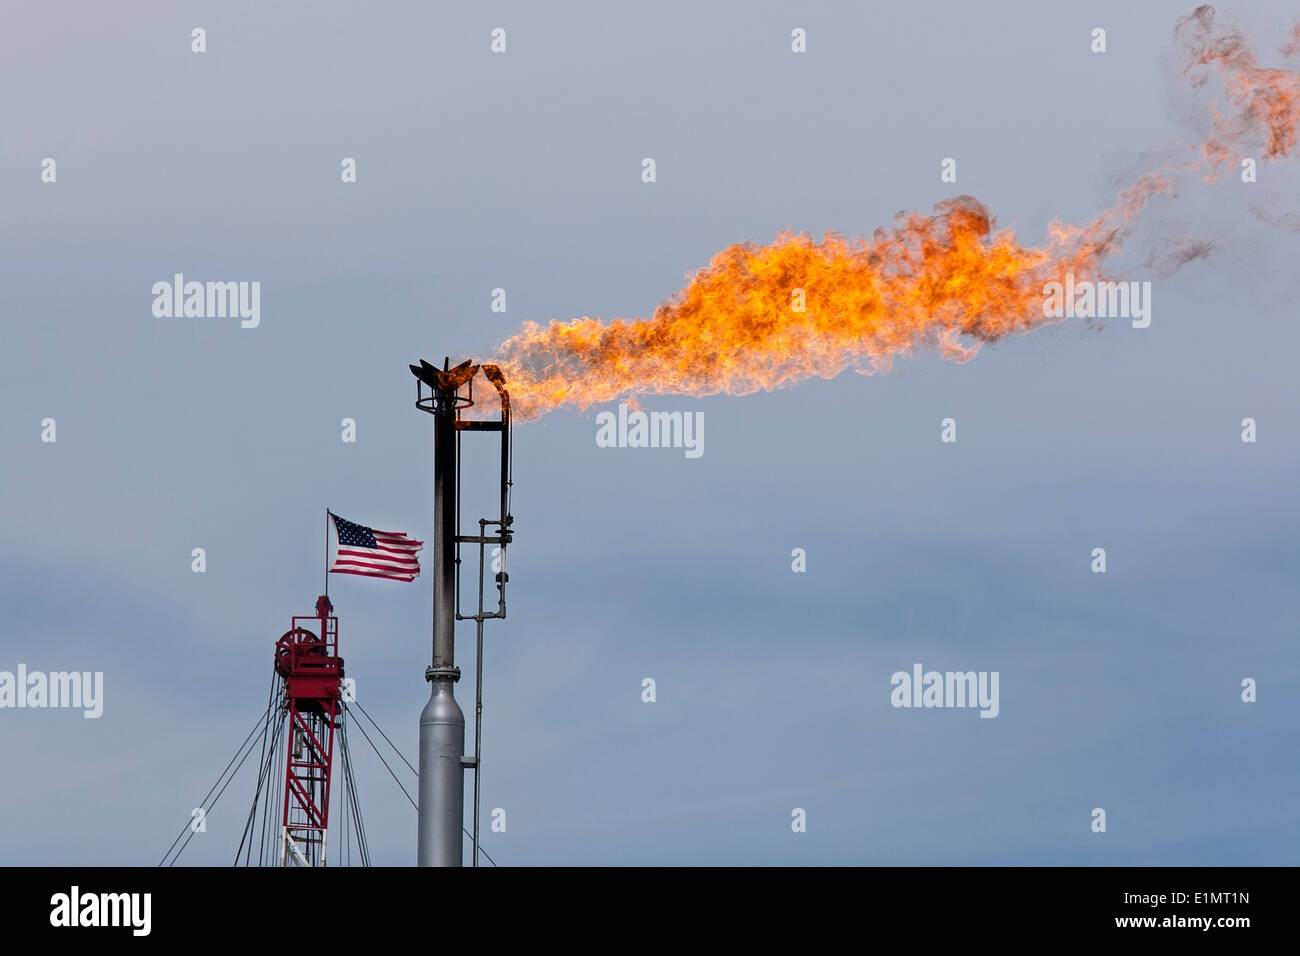 Epping, North Dakota - Natural gas is flared off as oil is pumped in the Bakken shale formation. The Stock Photo